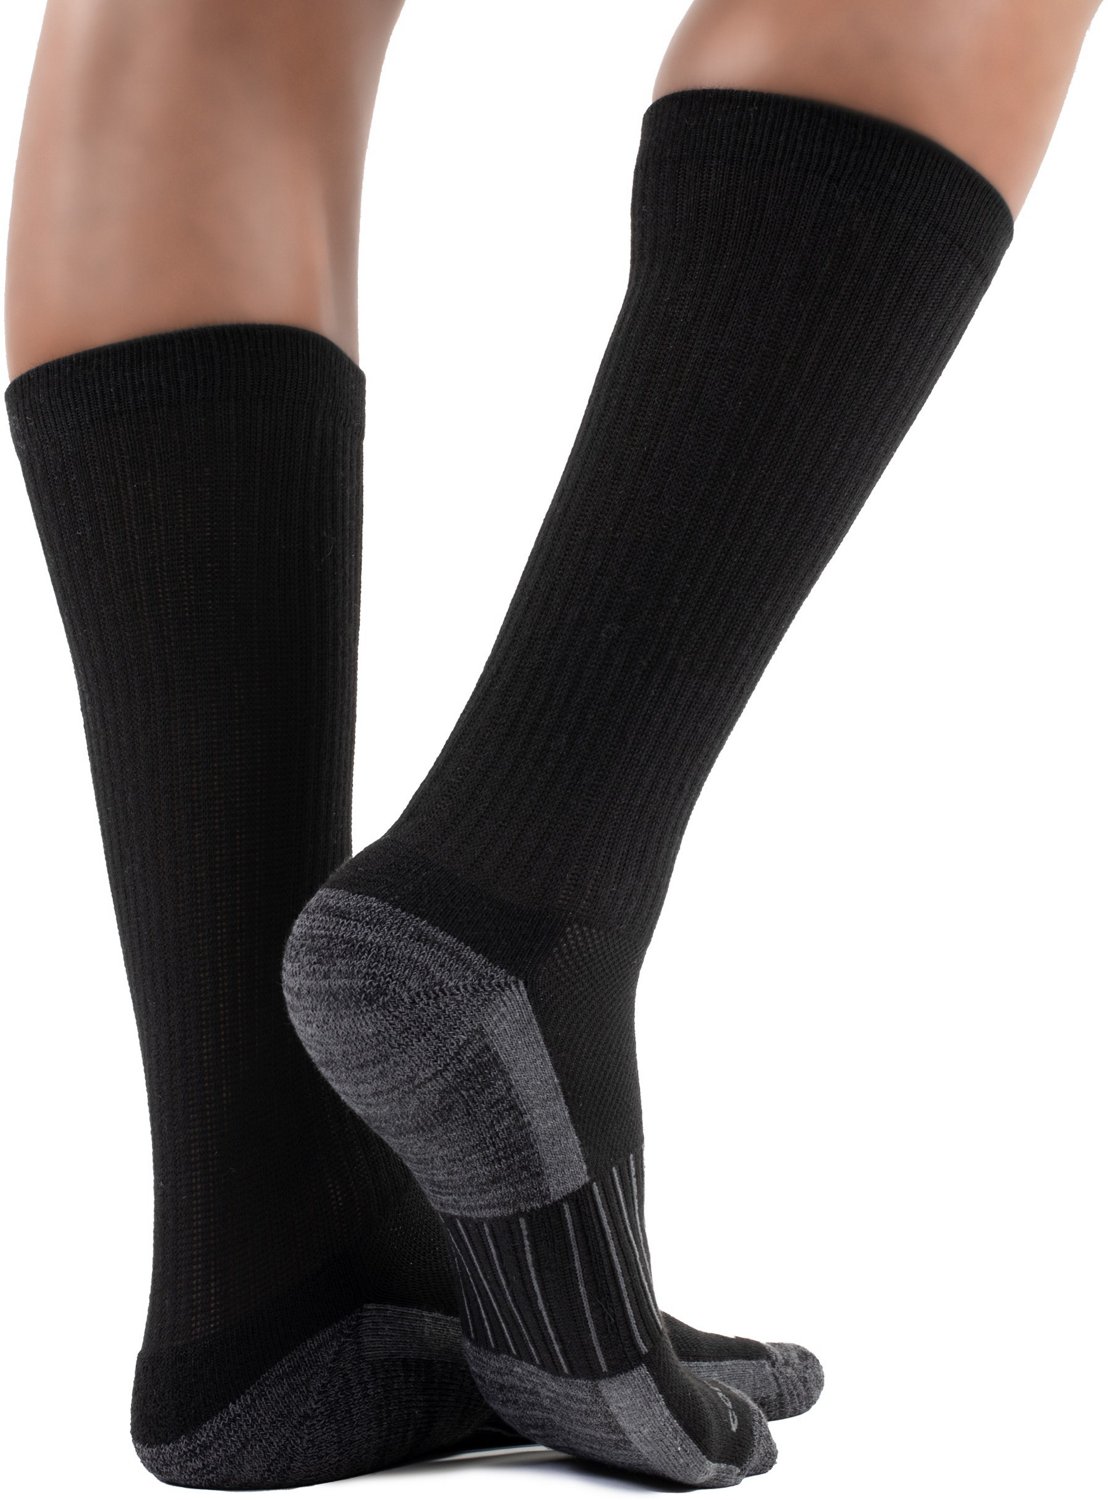 Copper Fit Adults' Energy Crew Socks 2 Pack | Academy